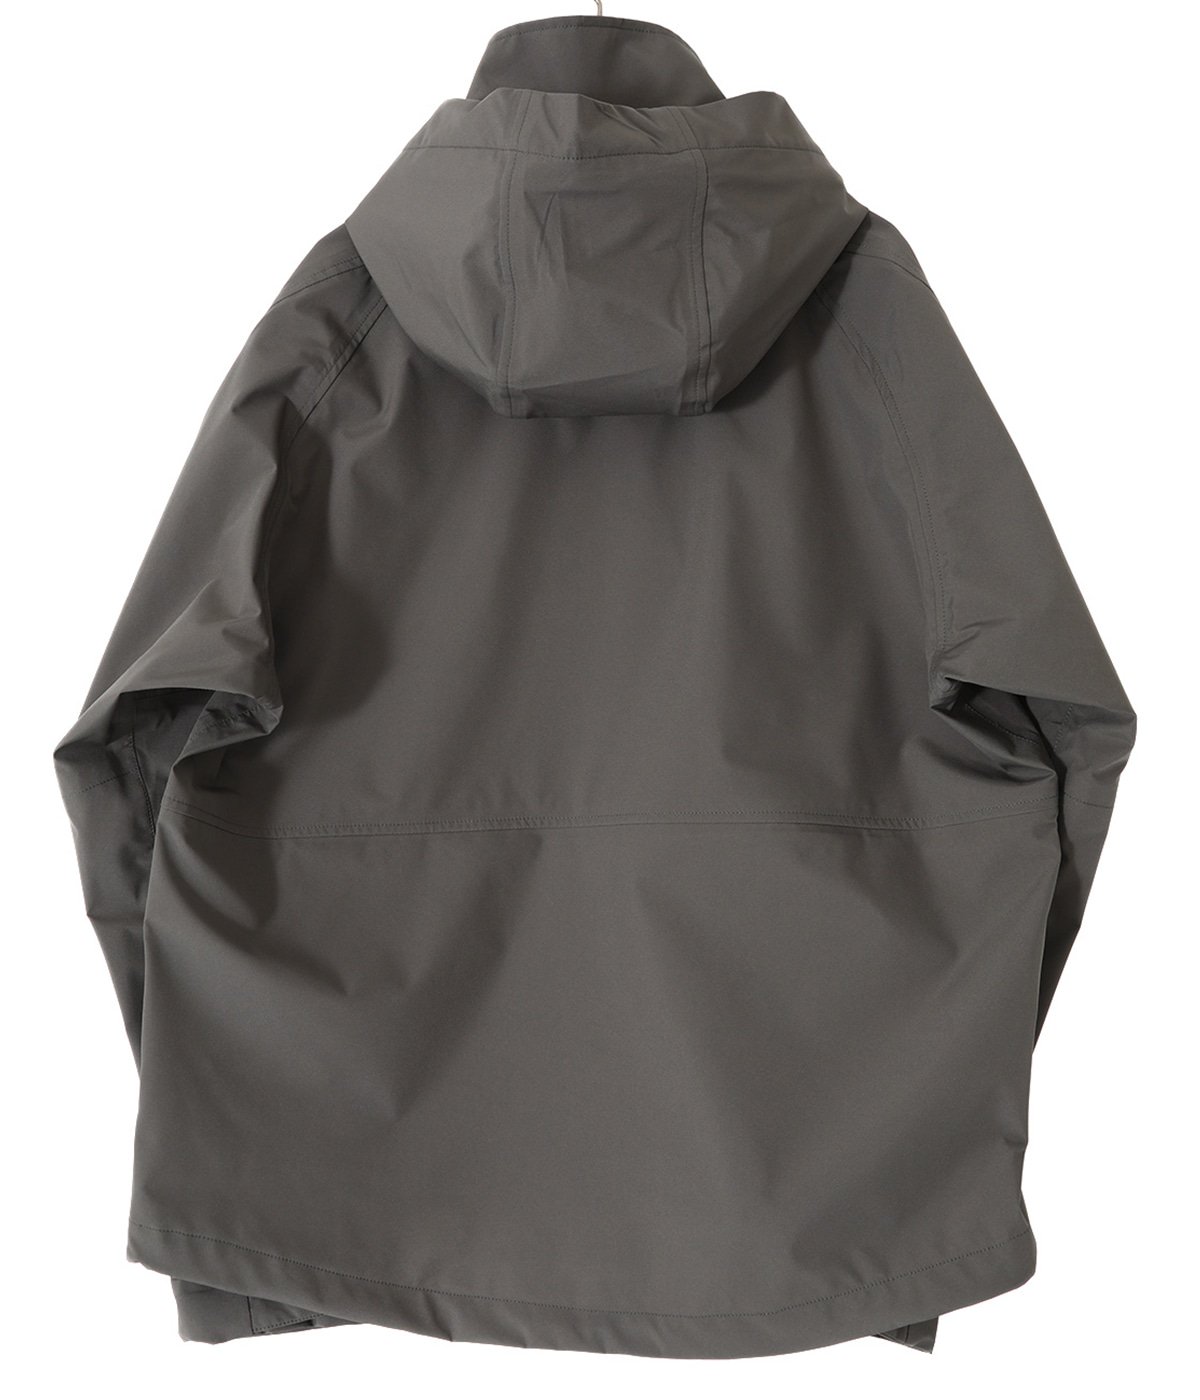 3LAYER WATER PROOF MILITARY SHELL